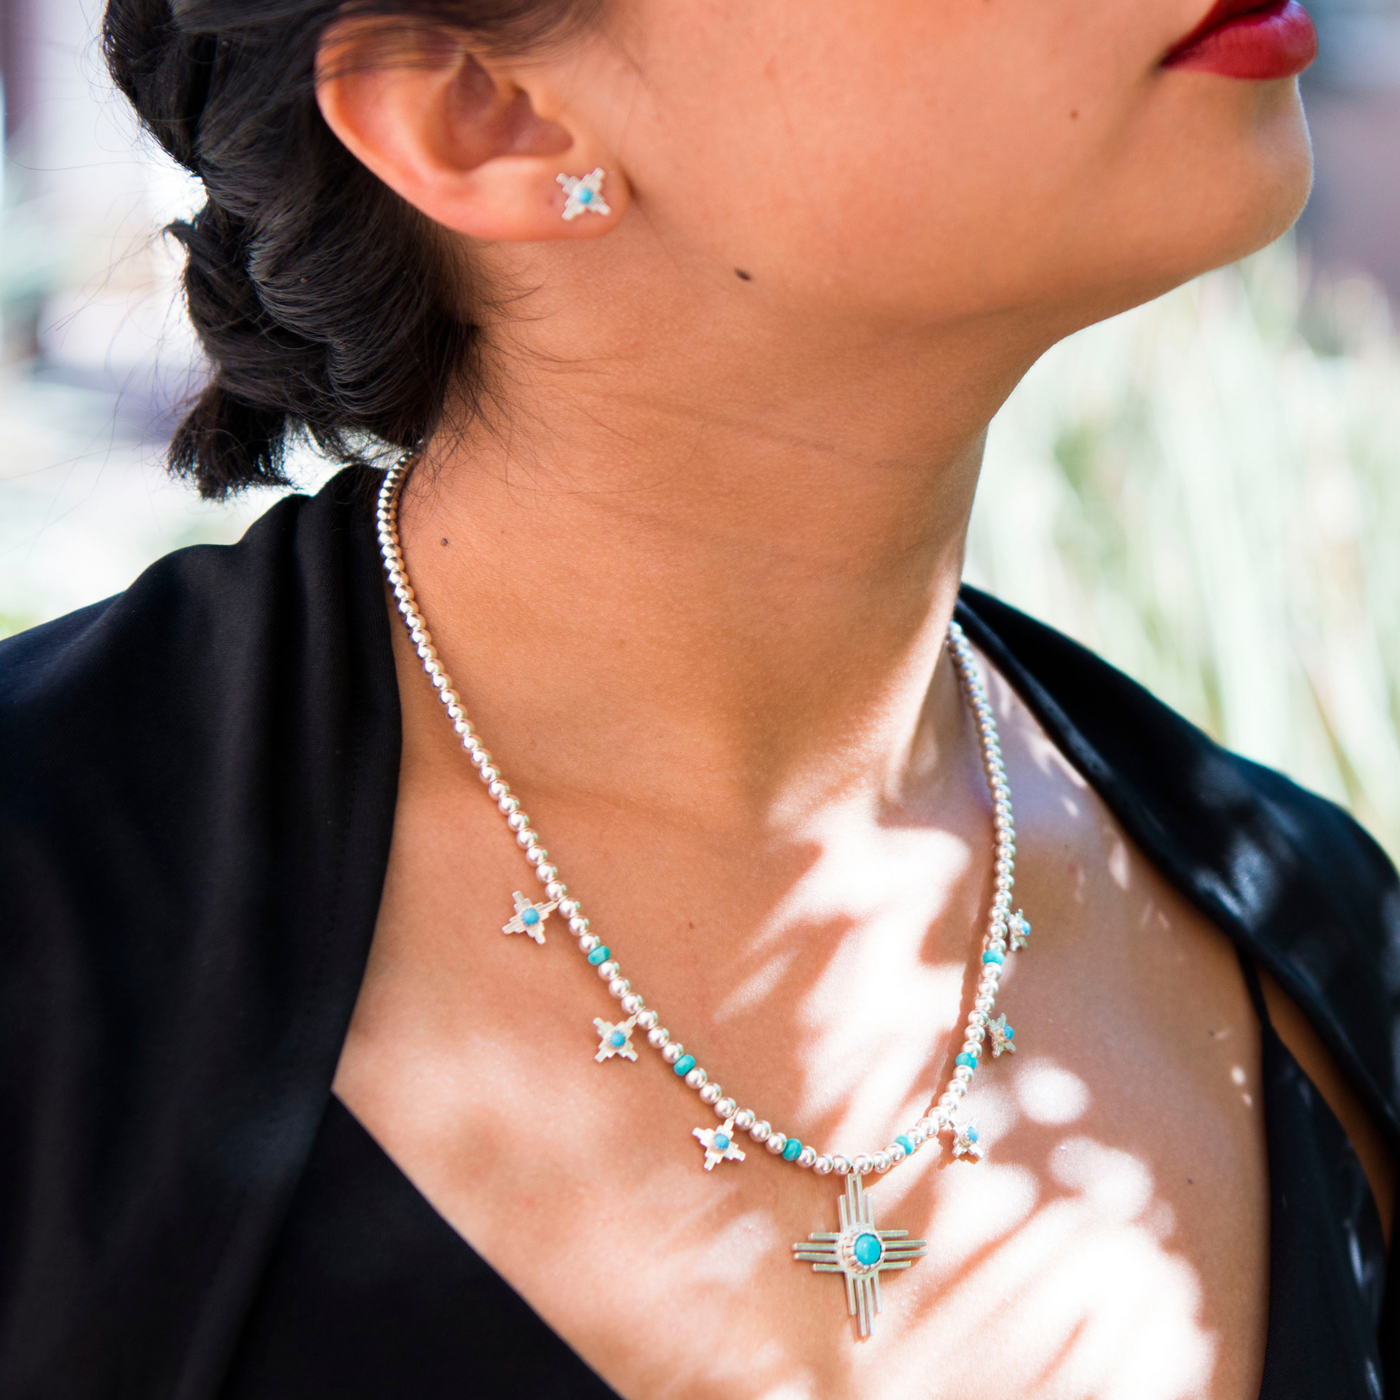 Zia Squash Blossom Necklace: Enchantment Sun Blossom Necklace | T.Skies Jewelry